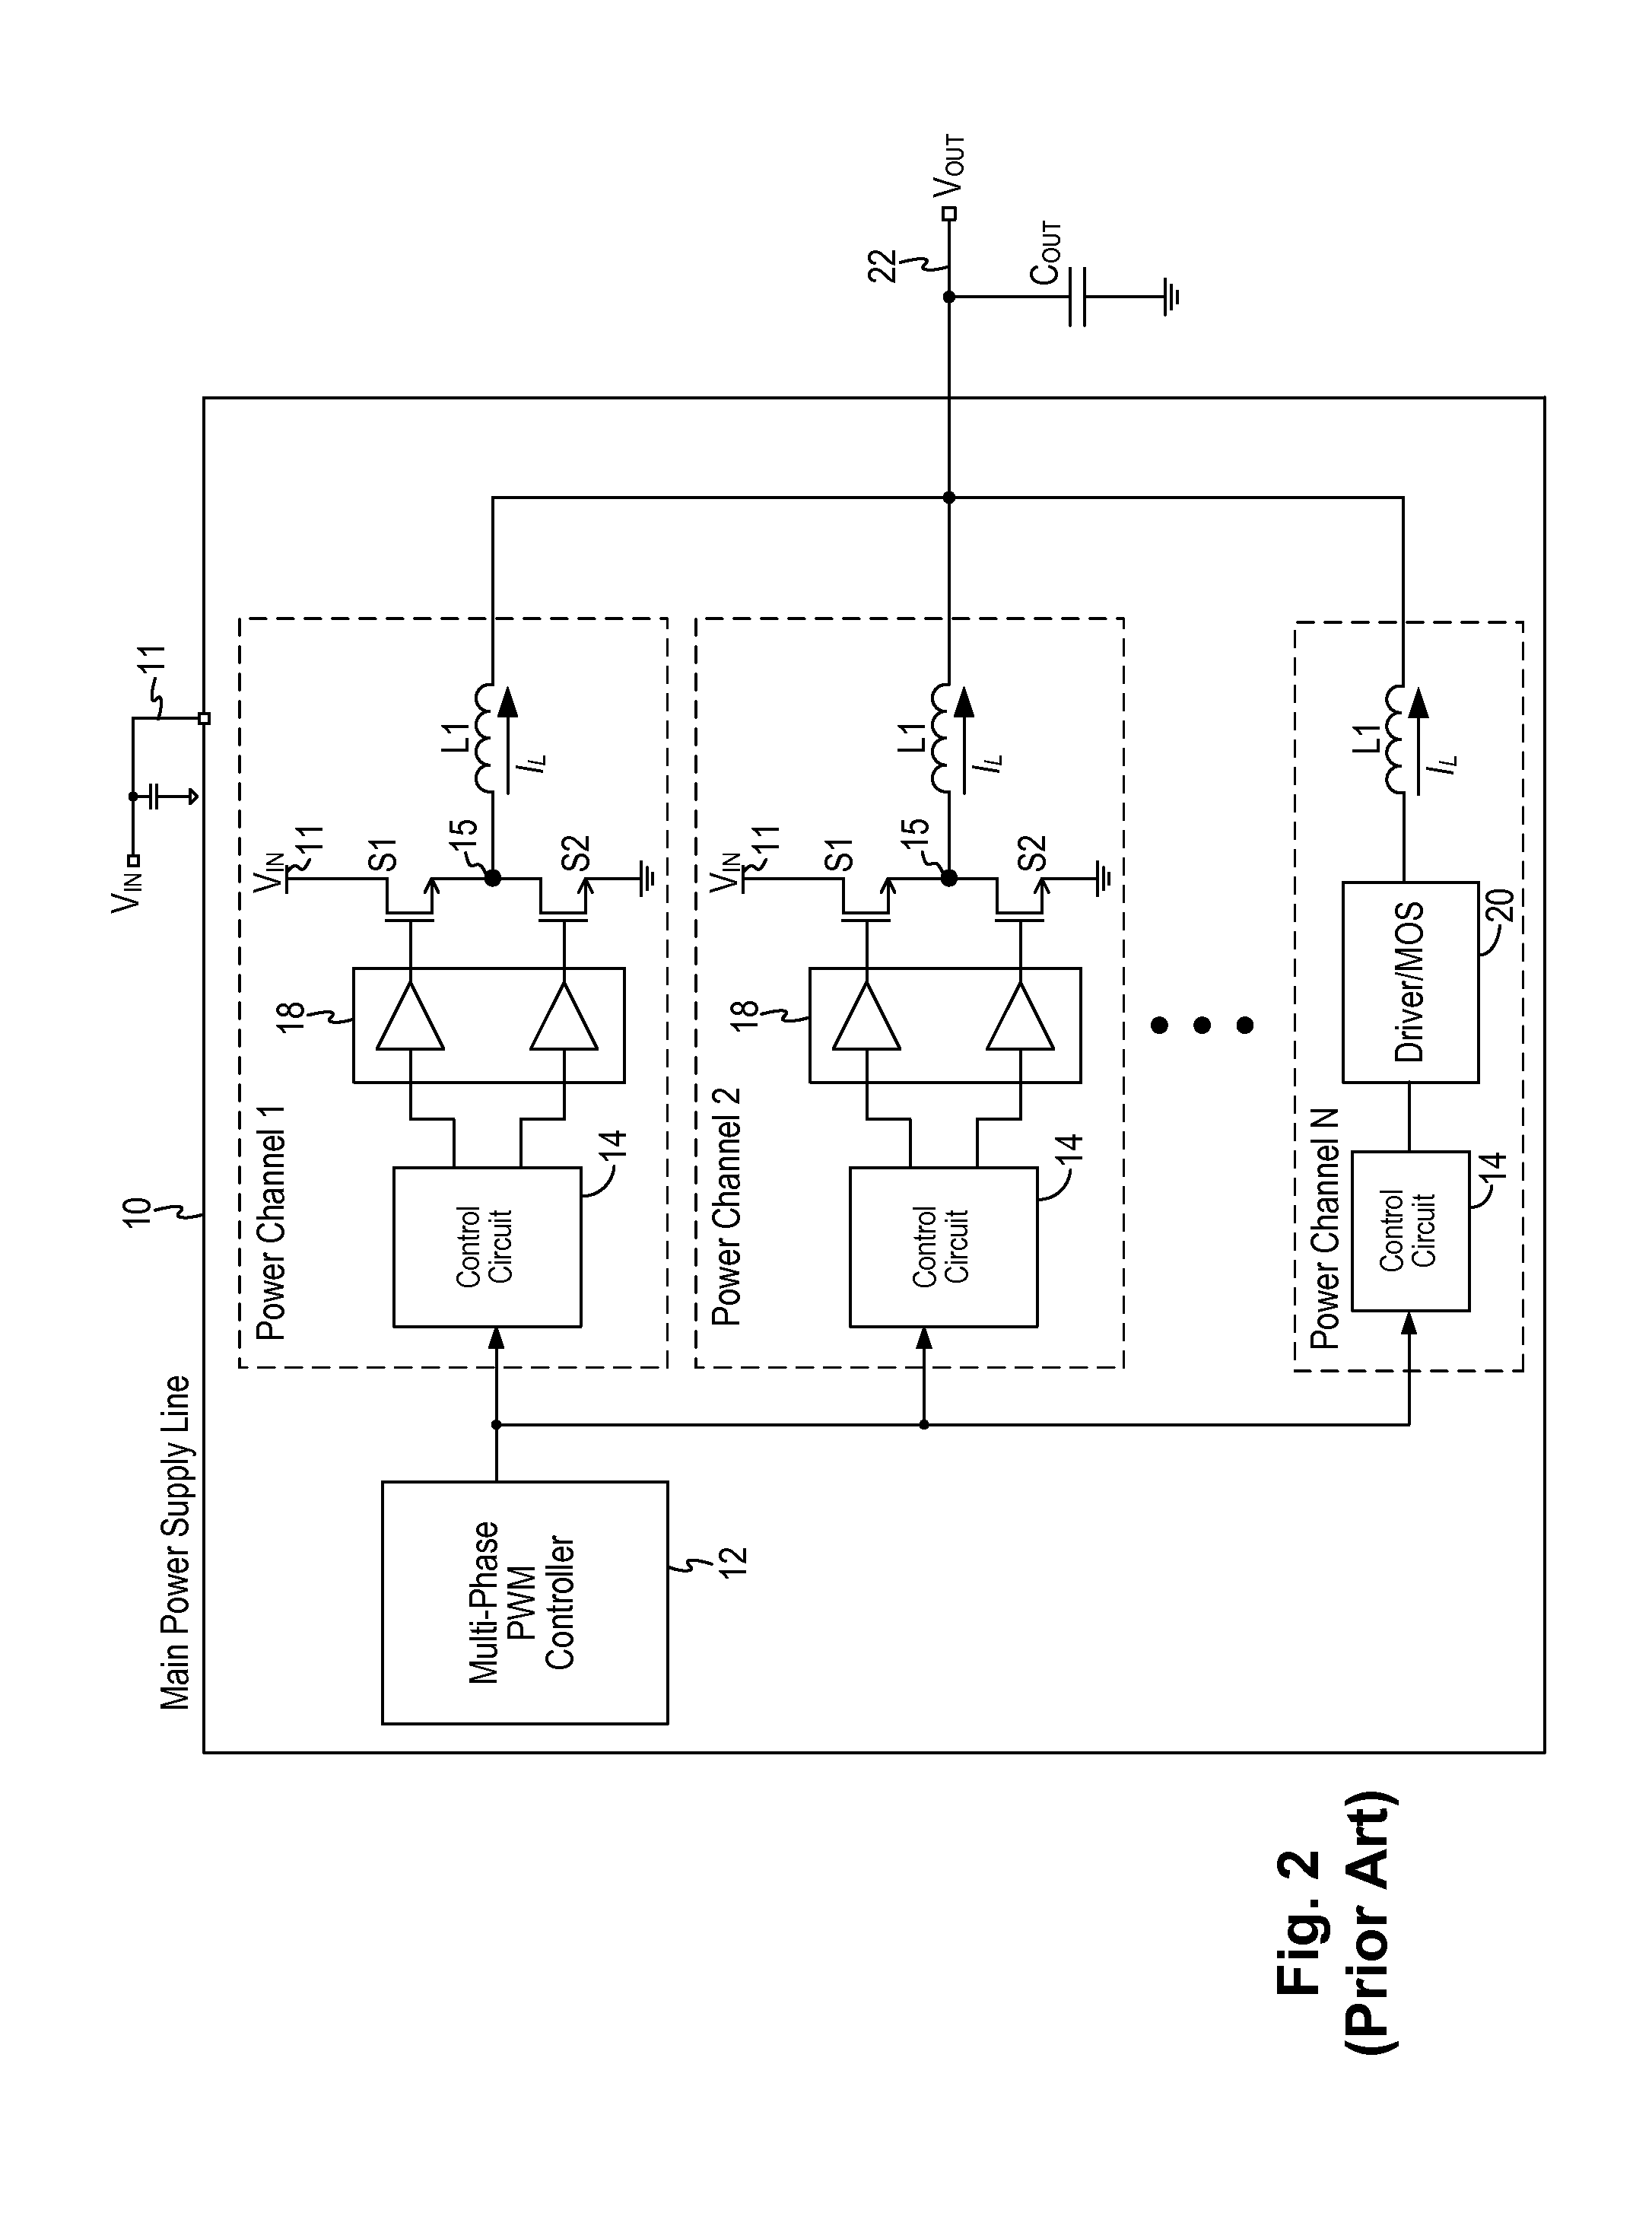 Fault tolerant power supply incorporating intelligent load switch to provide uninterrupted power